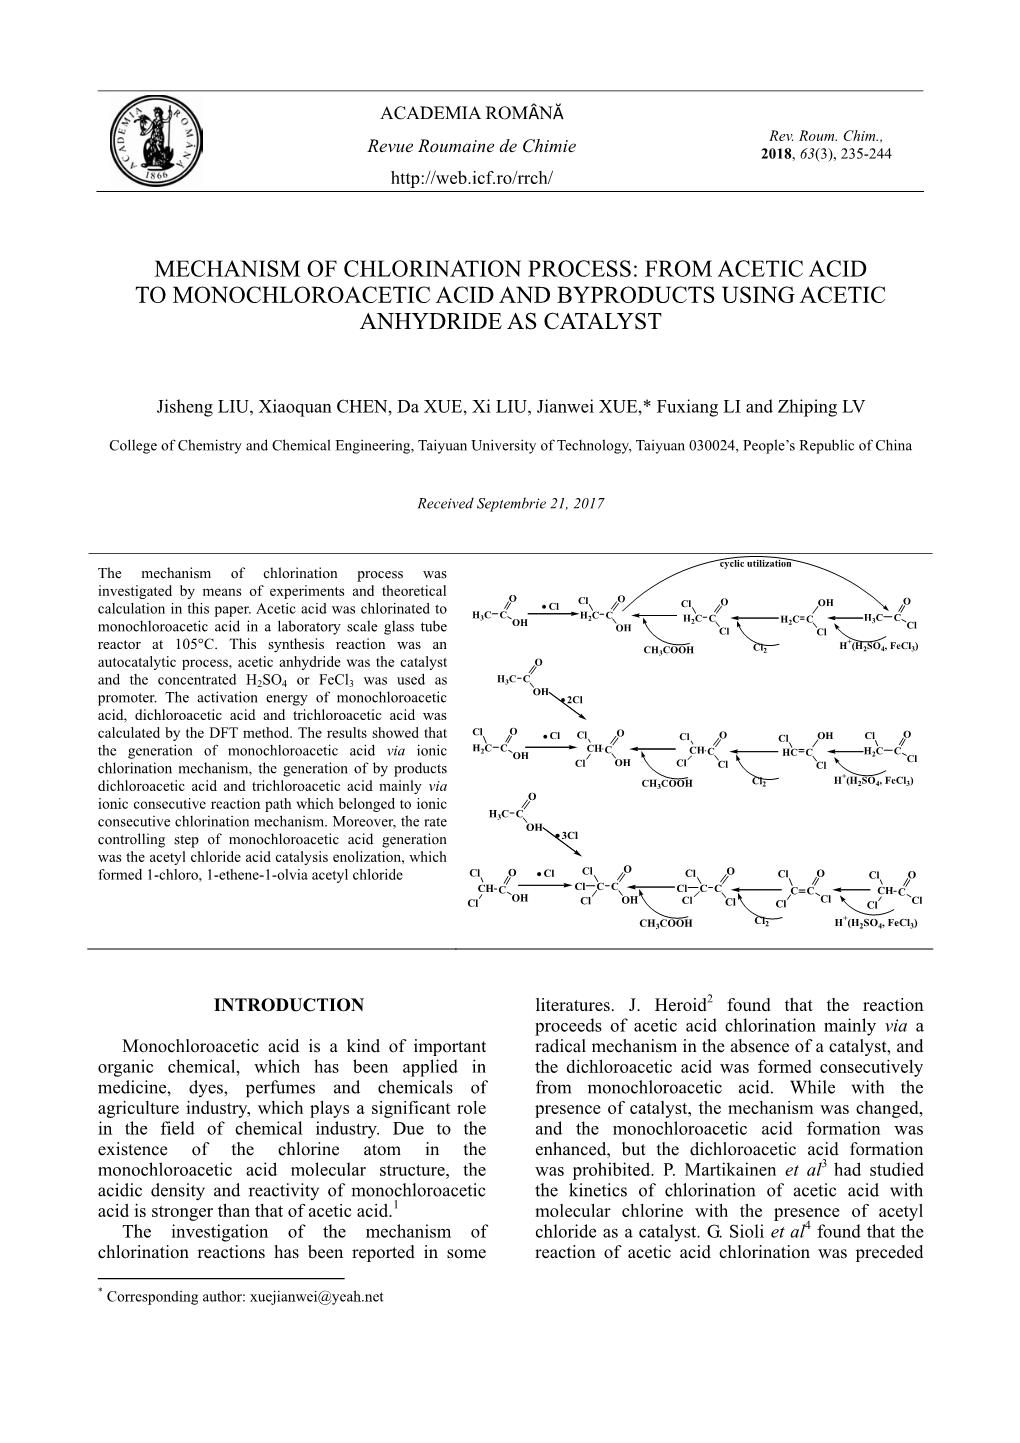 From Acetic Acid to Monochloroacetic Acid and Byproducts Using Acetic Anhydride As Catalyst